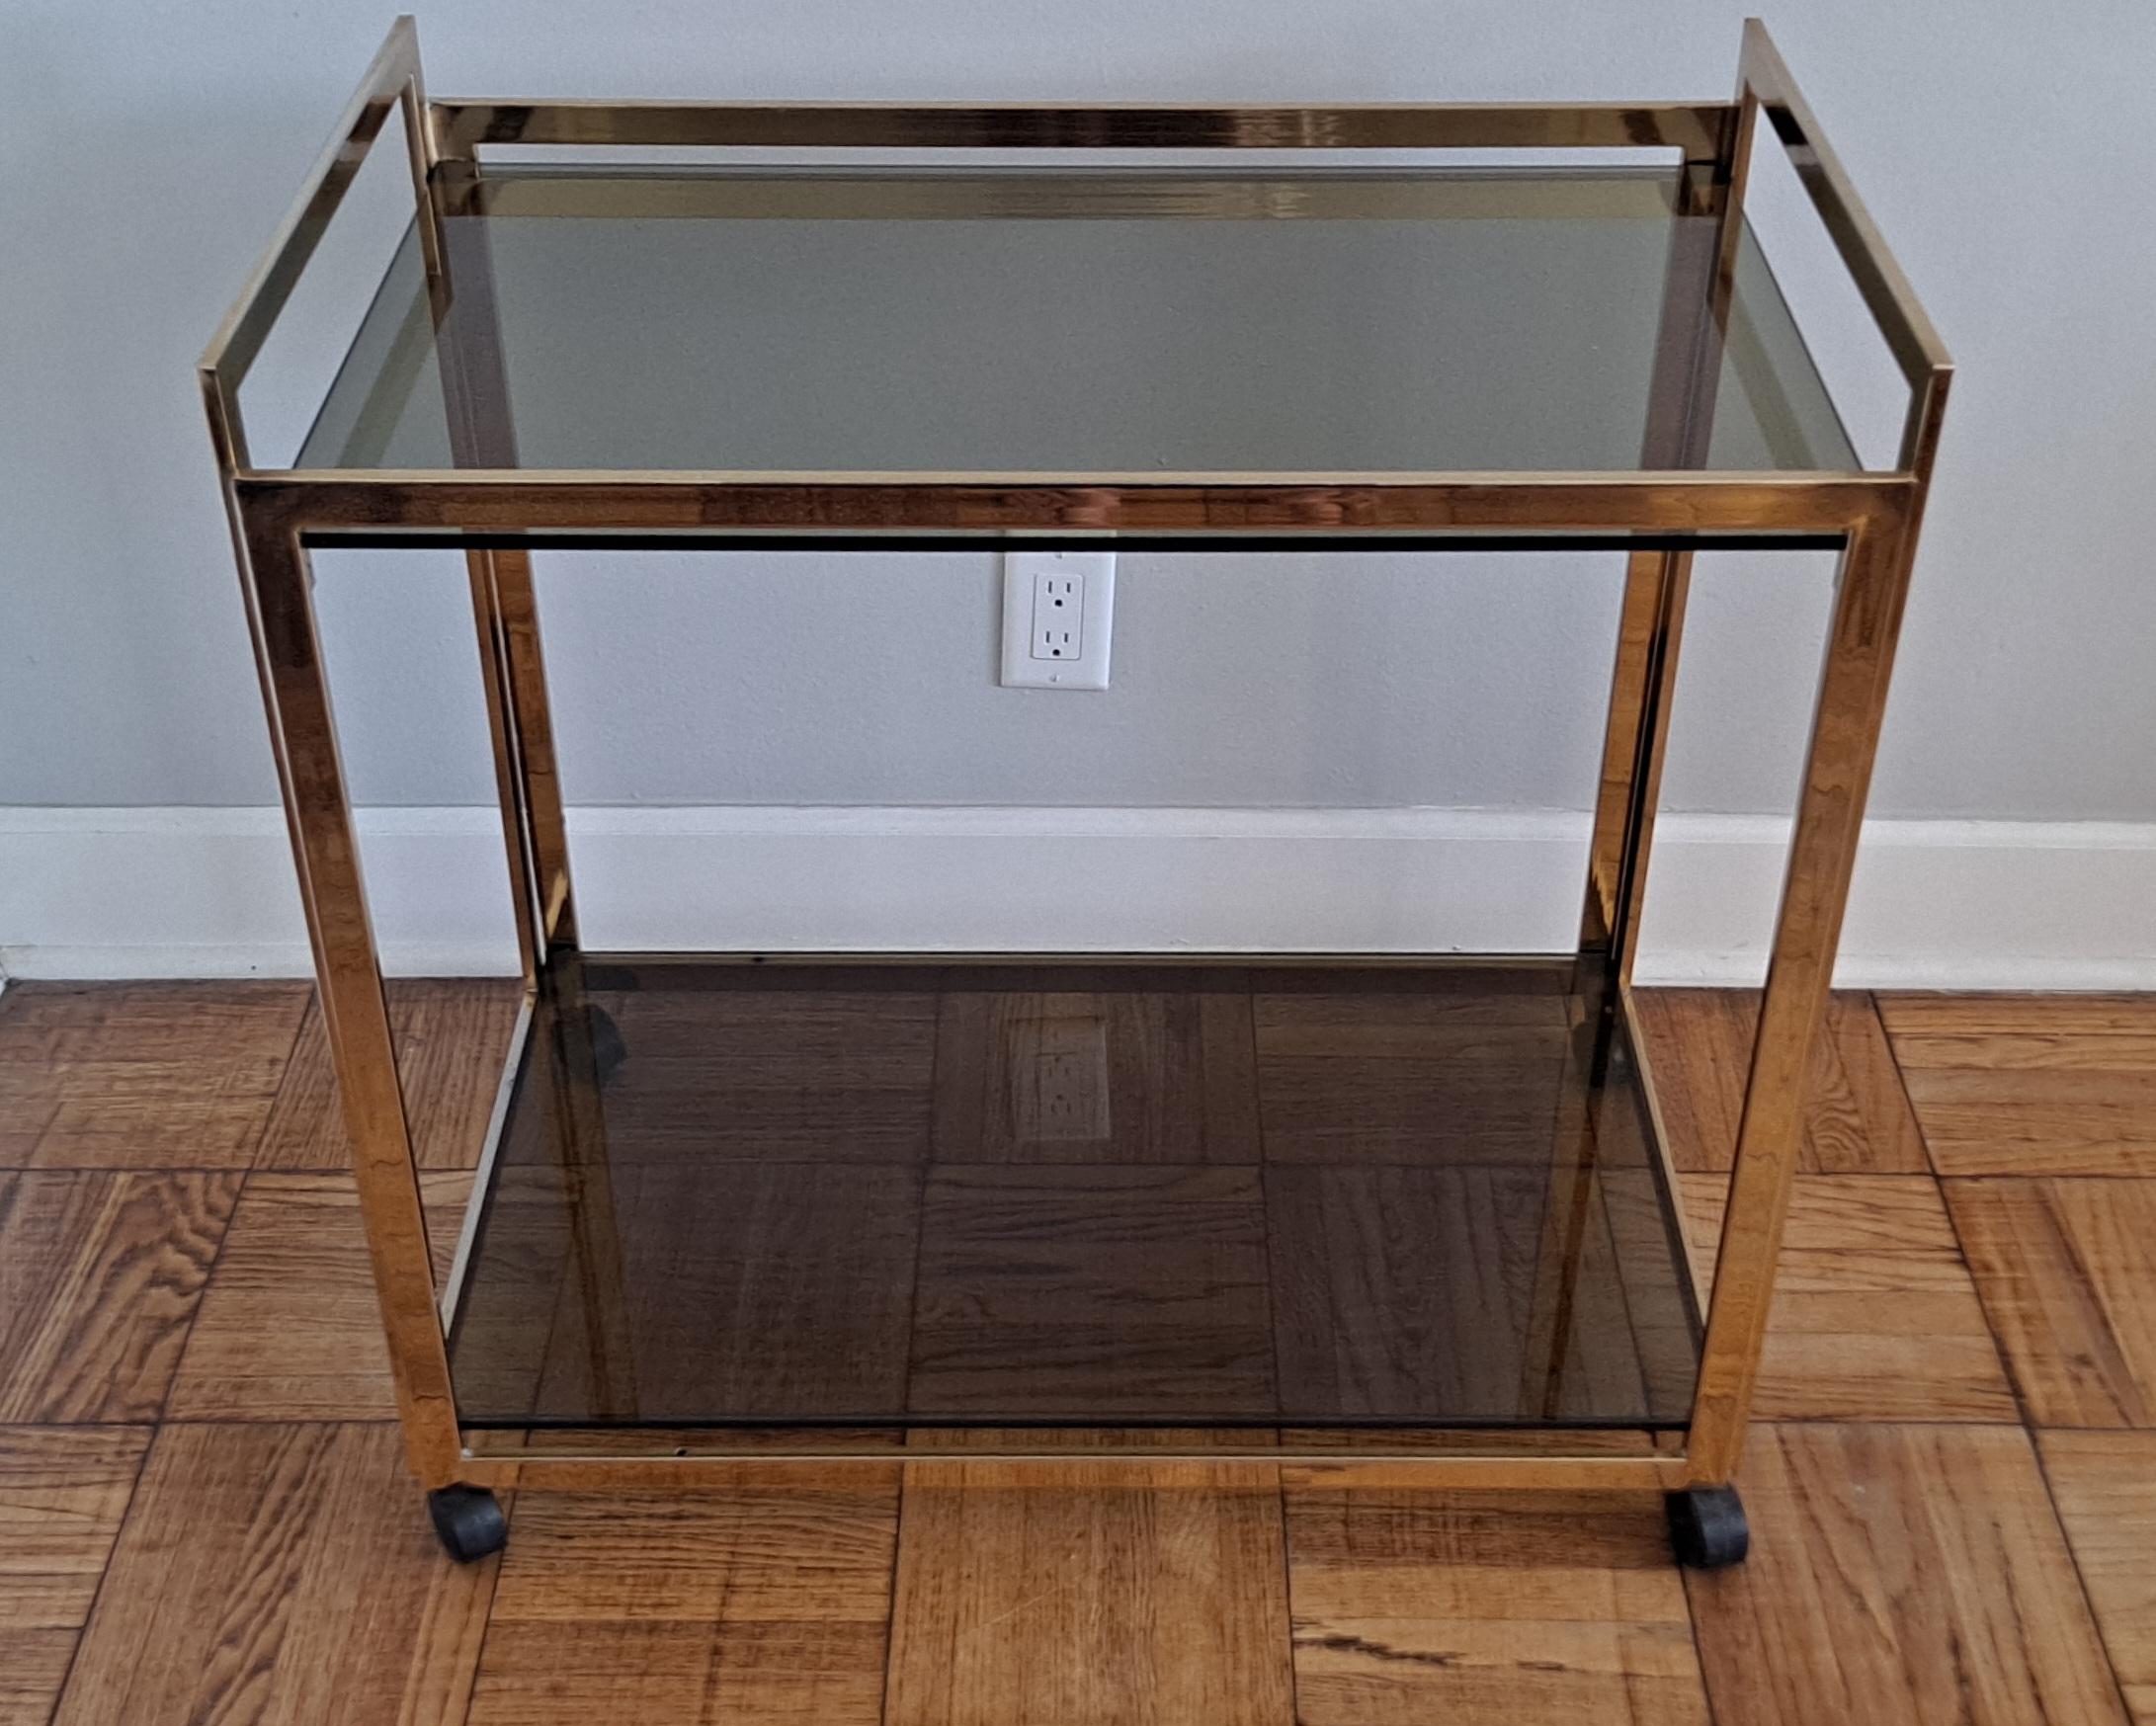 This stylish service cart has fume 1 cm tick fume glass top. It is on the wheals and it is easy to move .Base is brass and it is very good structurally but the brass is tarnish, bar cart it is  made with a lot of taste . 
USA continental  in home